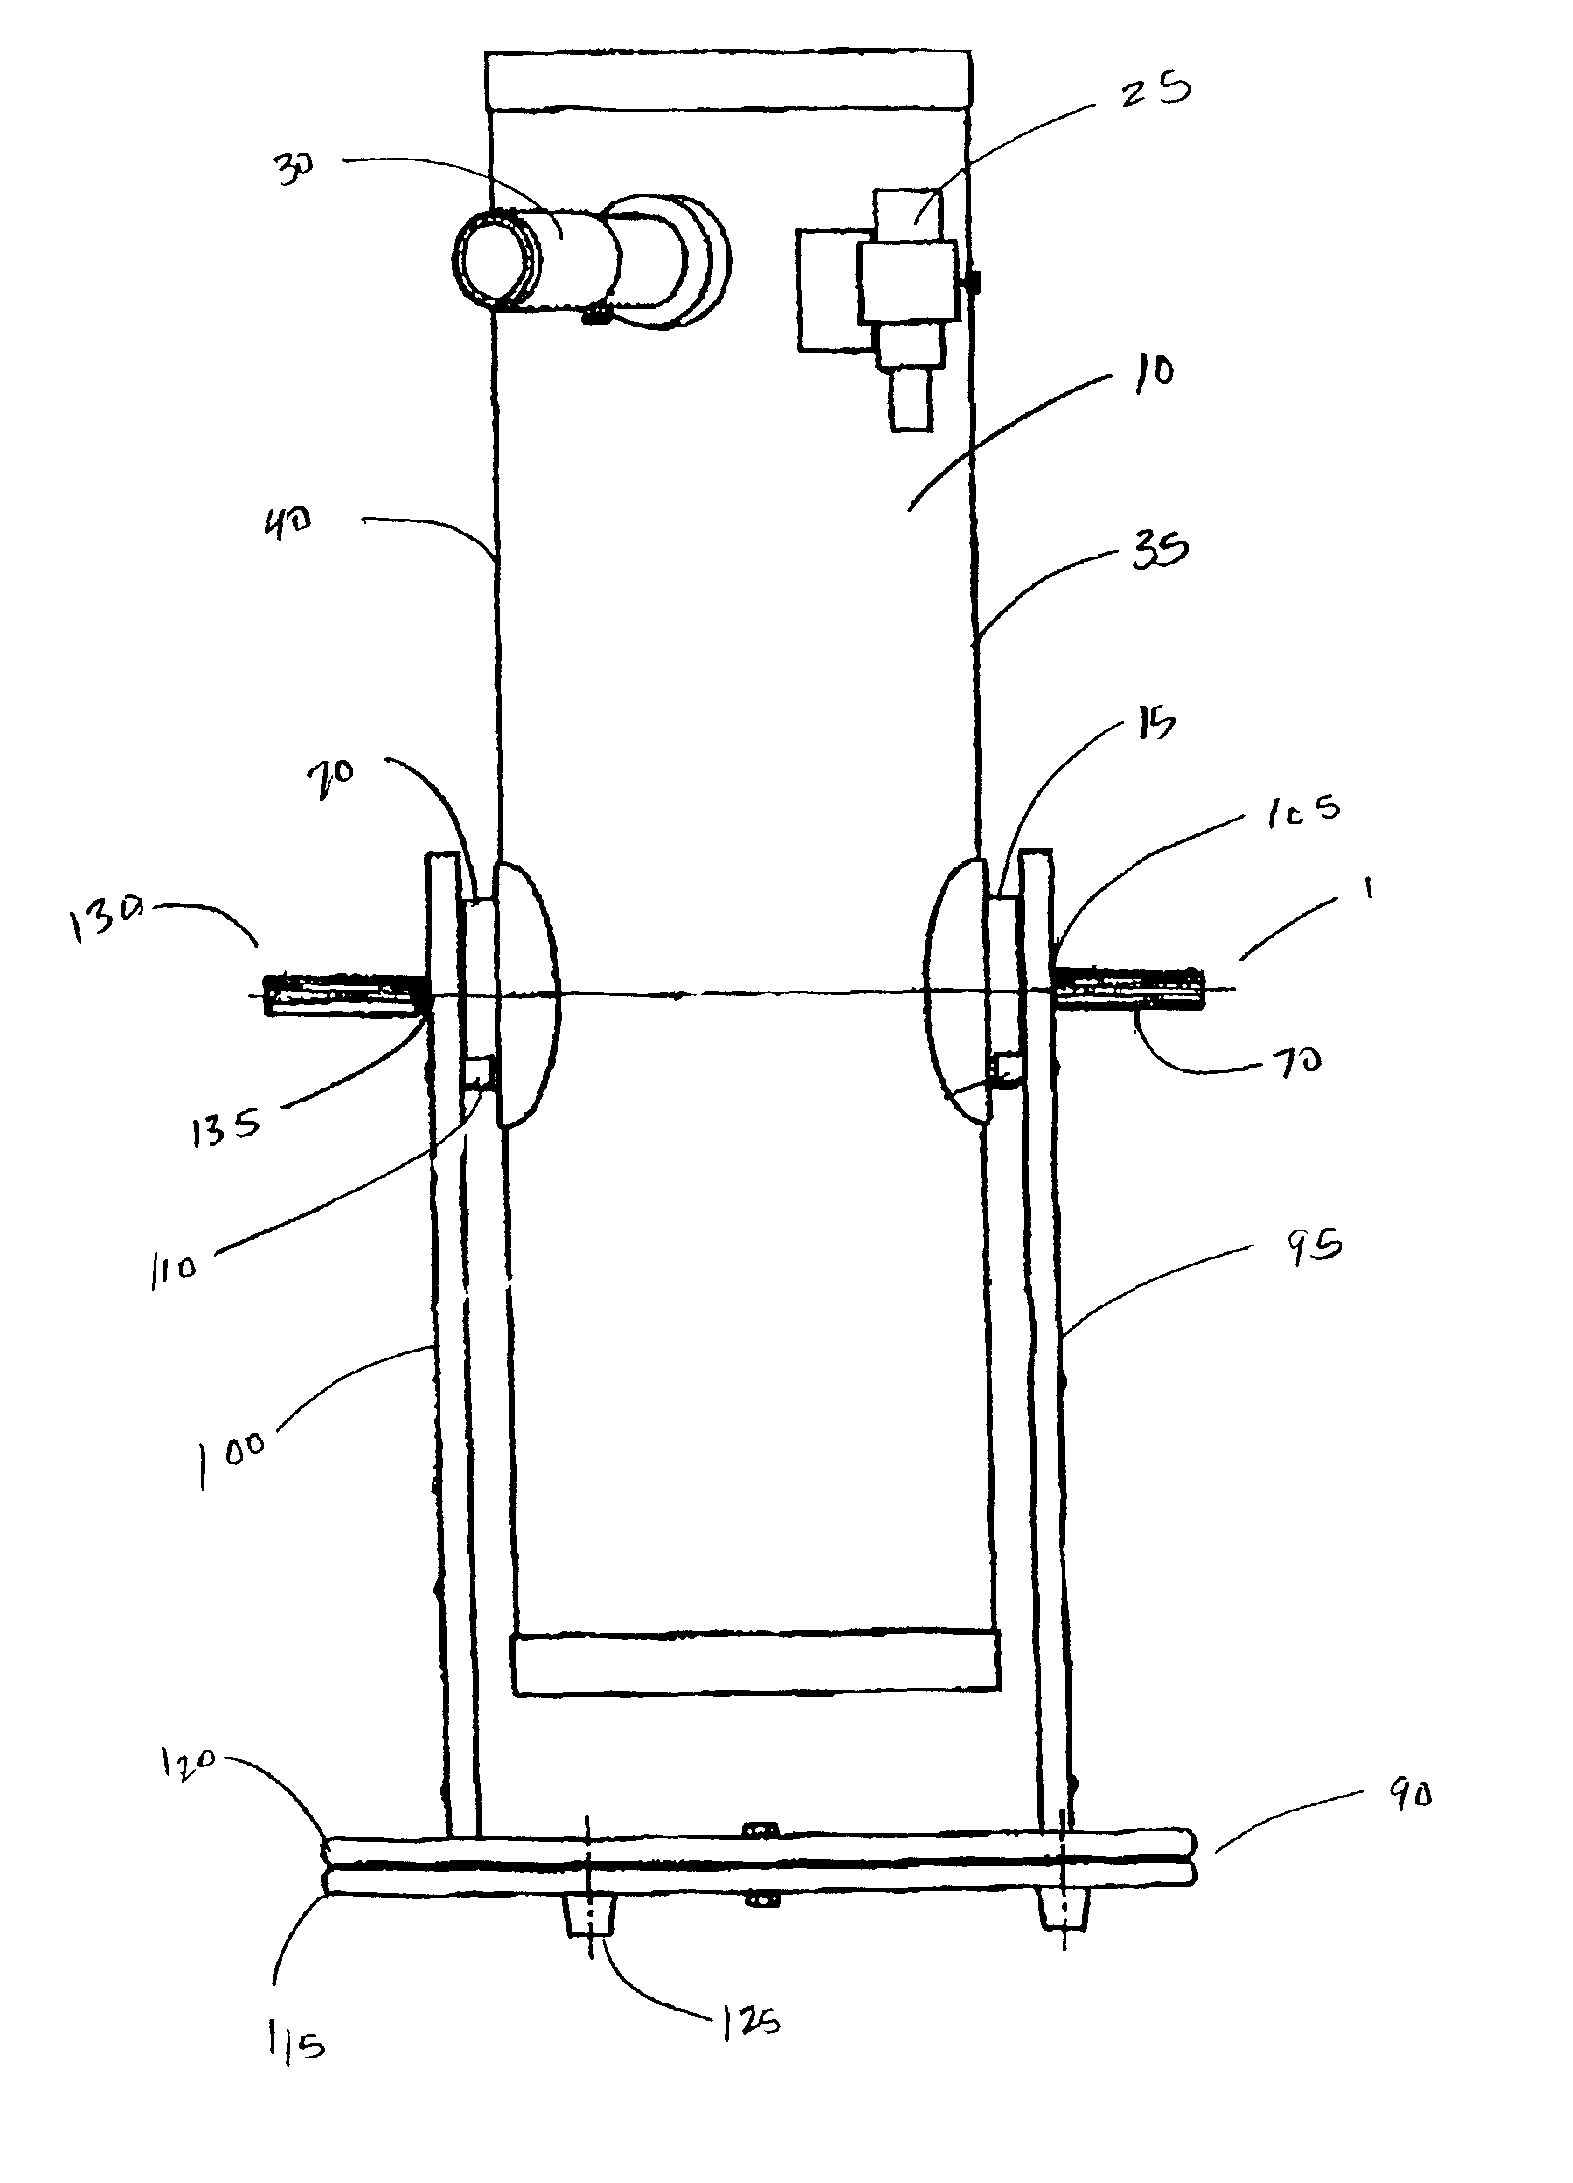 Apparatus and method for stabilizing an optical tube on a base